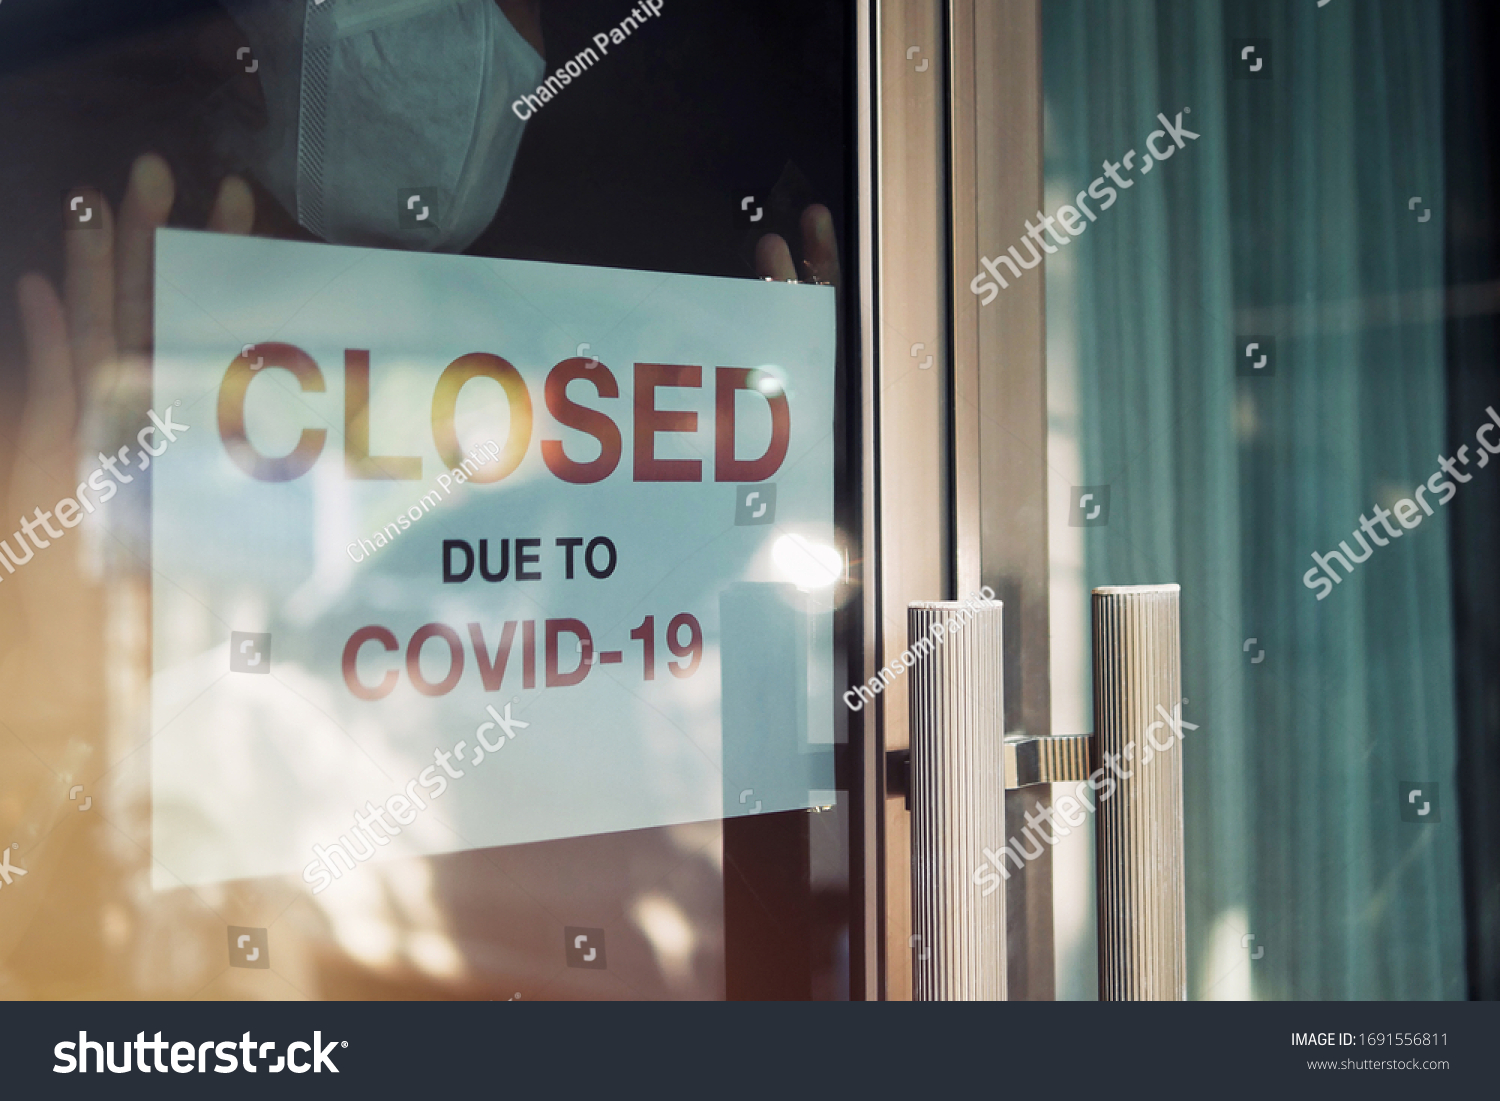 Business office or store shop is closed, bankrupt business due to the effect of novel Coronavirus (COVID-19) pandemic. Unidentified person wearing mask hanging closed sign in background on front door. #1691556811